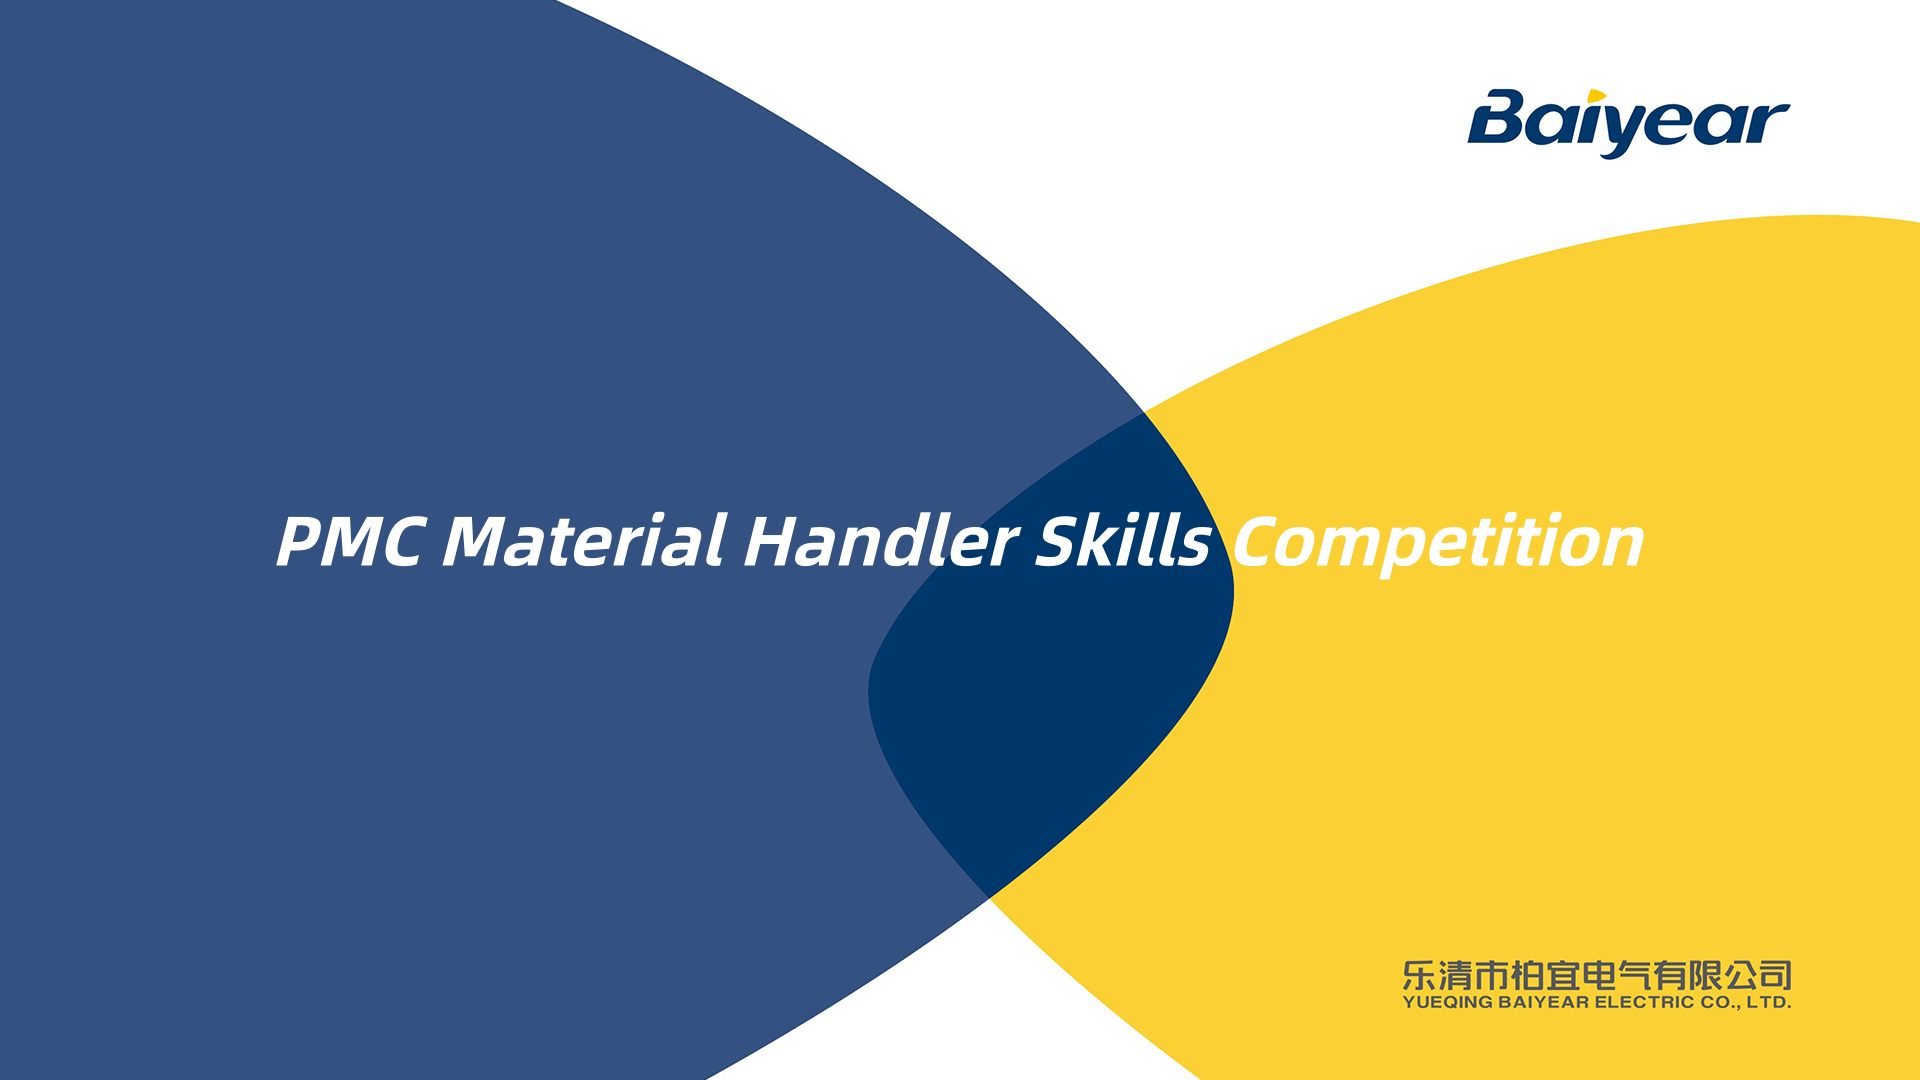 PMC Material Handler Skills Competition Ignites Baiyear Electronics Employees’ Skillstorm!